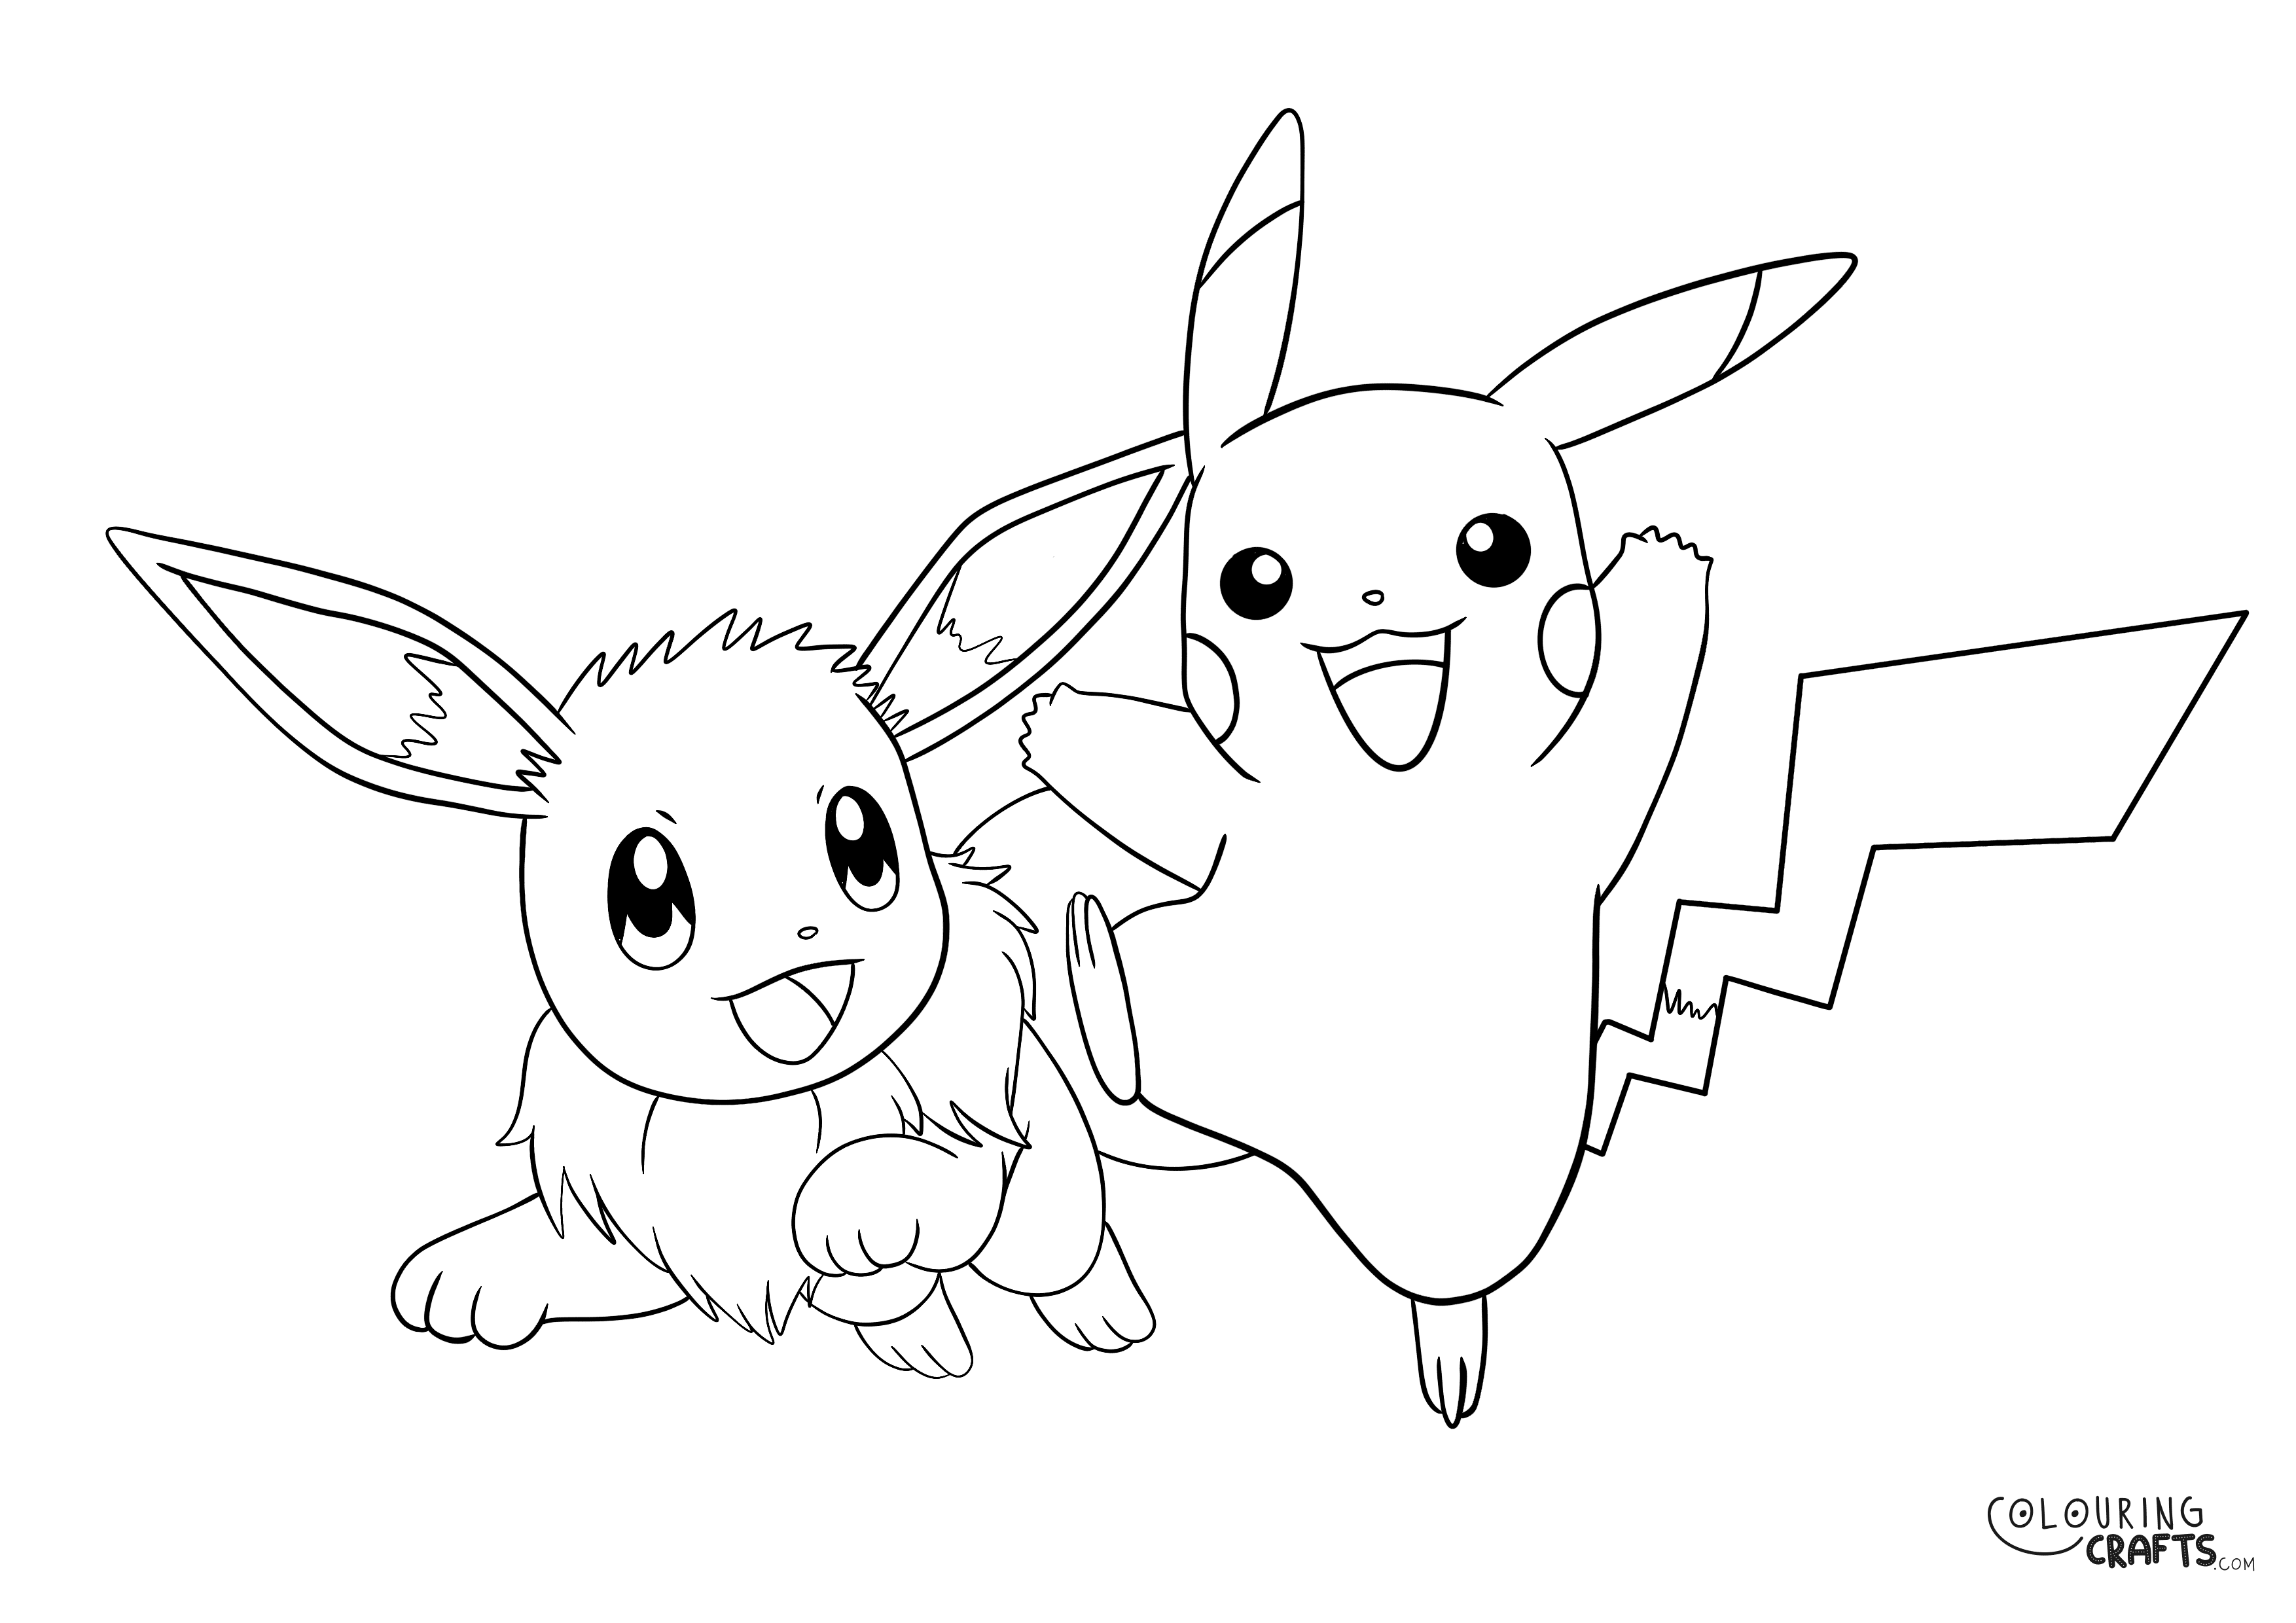 Pikachu and eevee pokemon colouring page